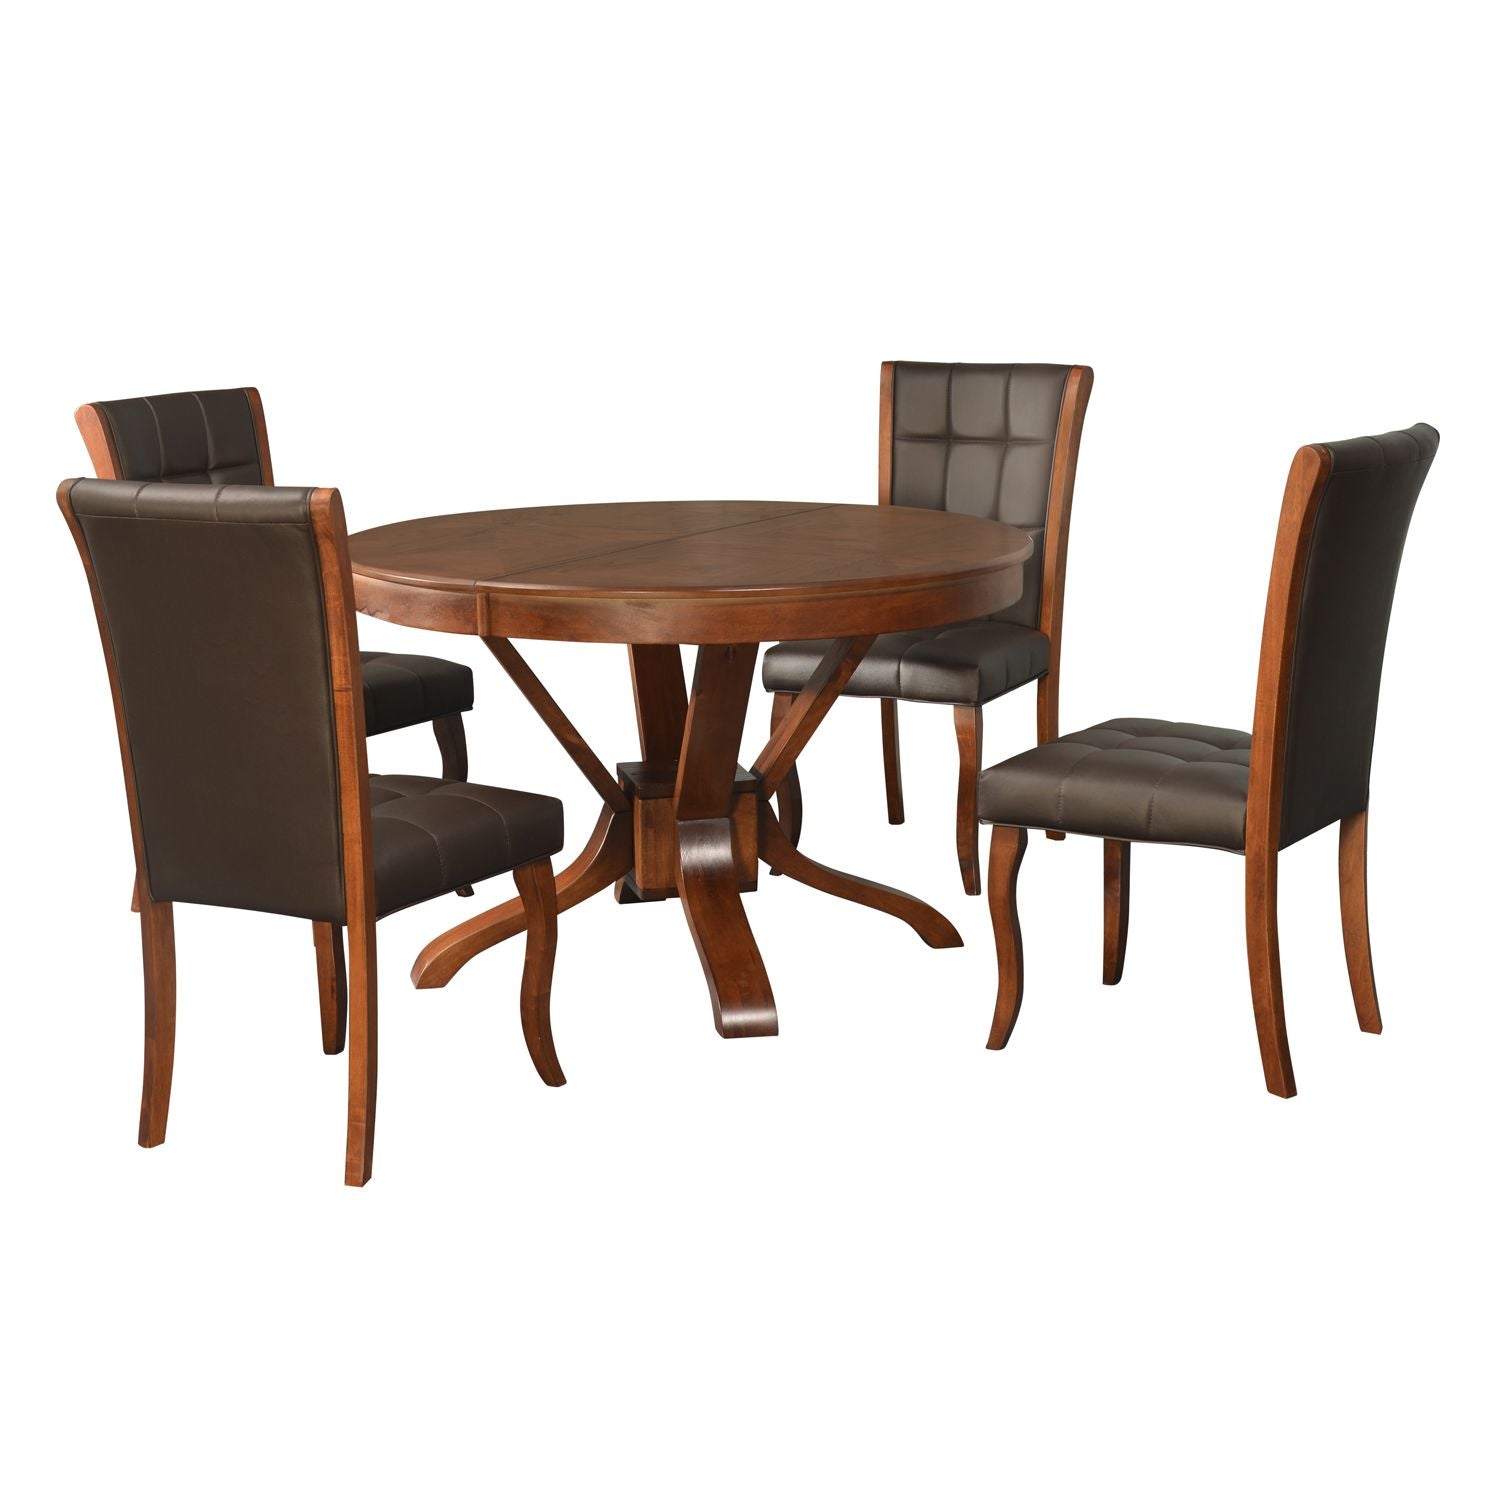 Avante Extendable Engineered wood 6 Seater Dining Set With Chairs (Antique Oak)